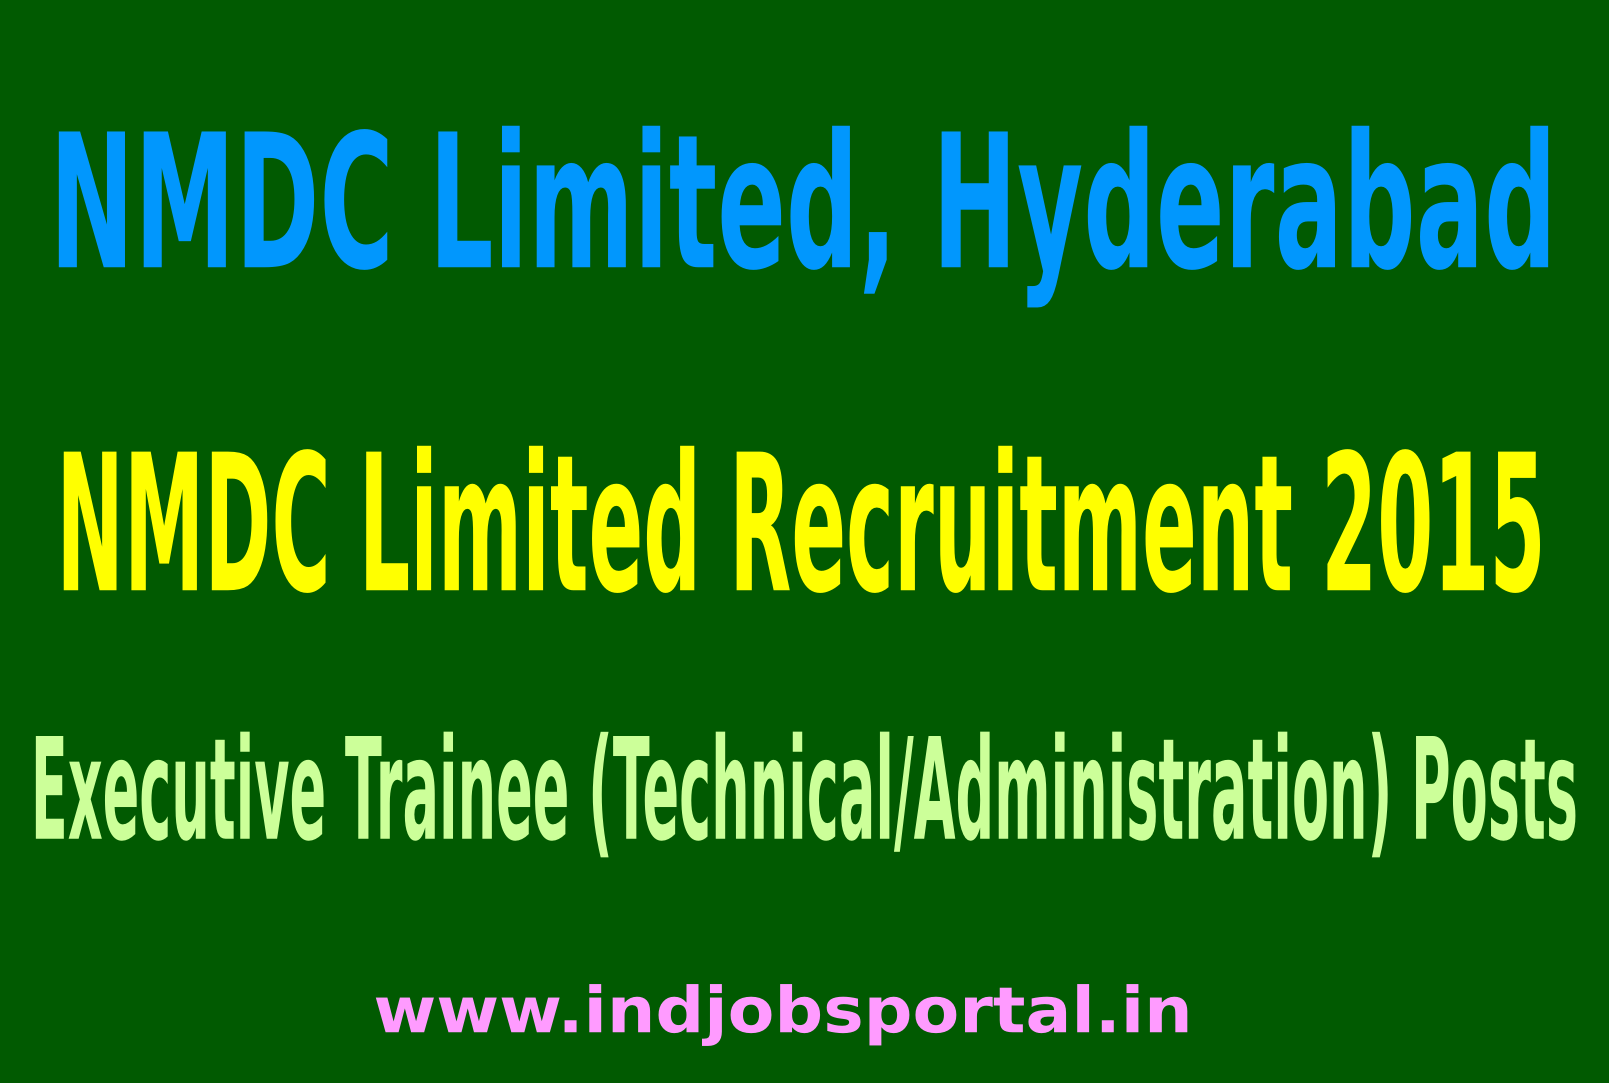 NMDC Limited Recruitment 2015 For 250 Executive Trainee (Technical/Administration) Posts